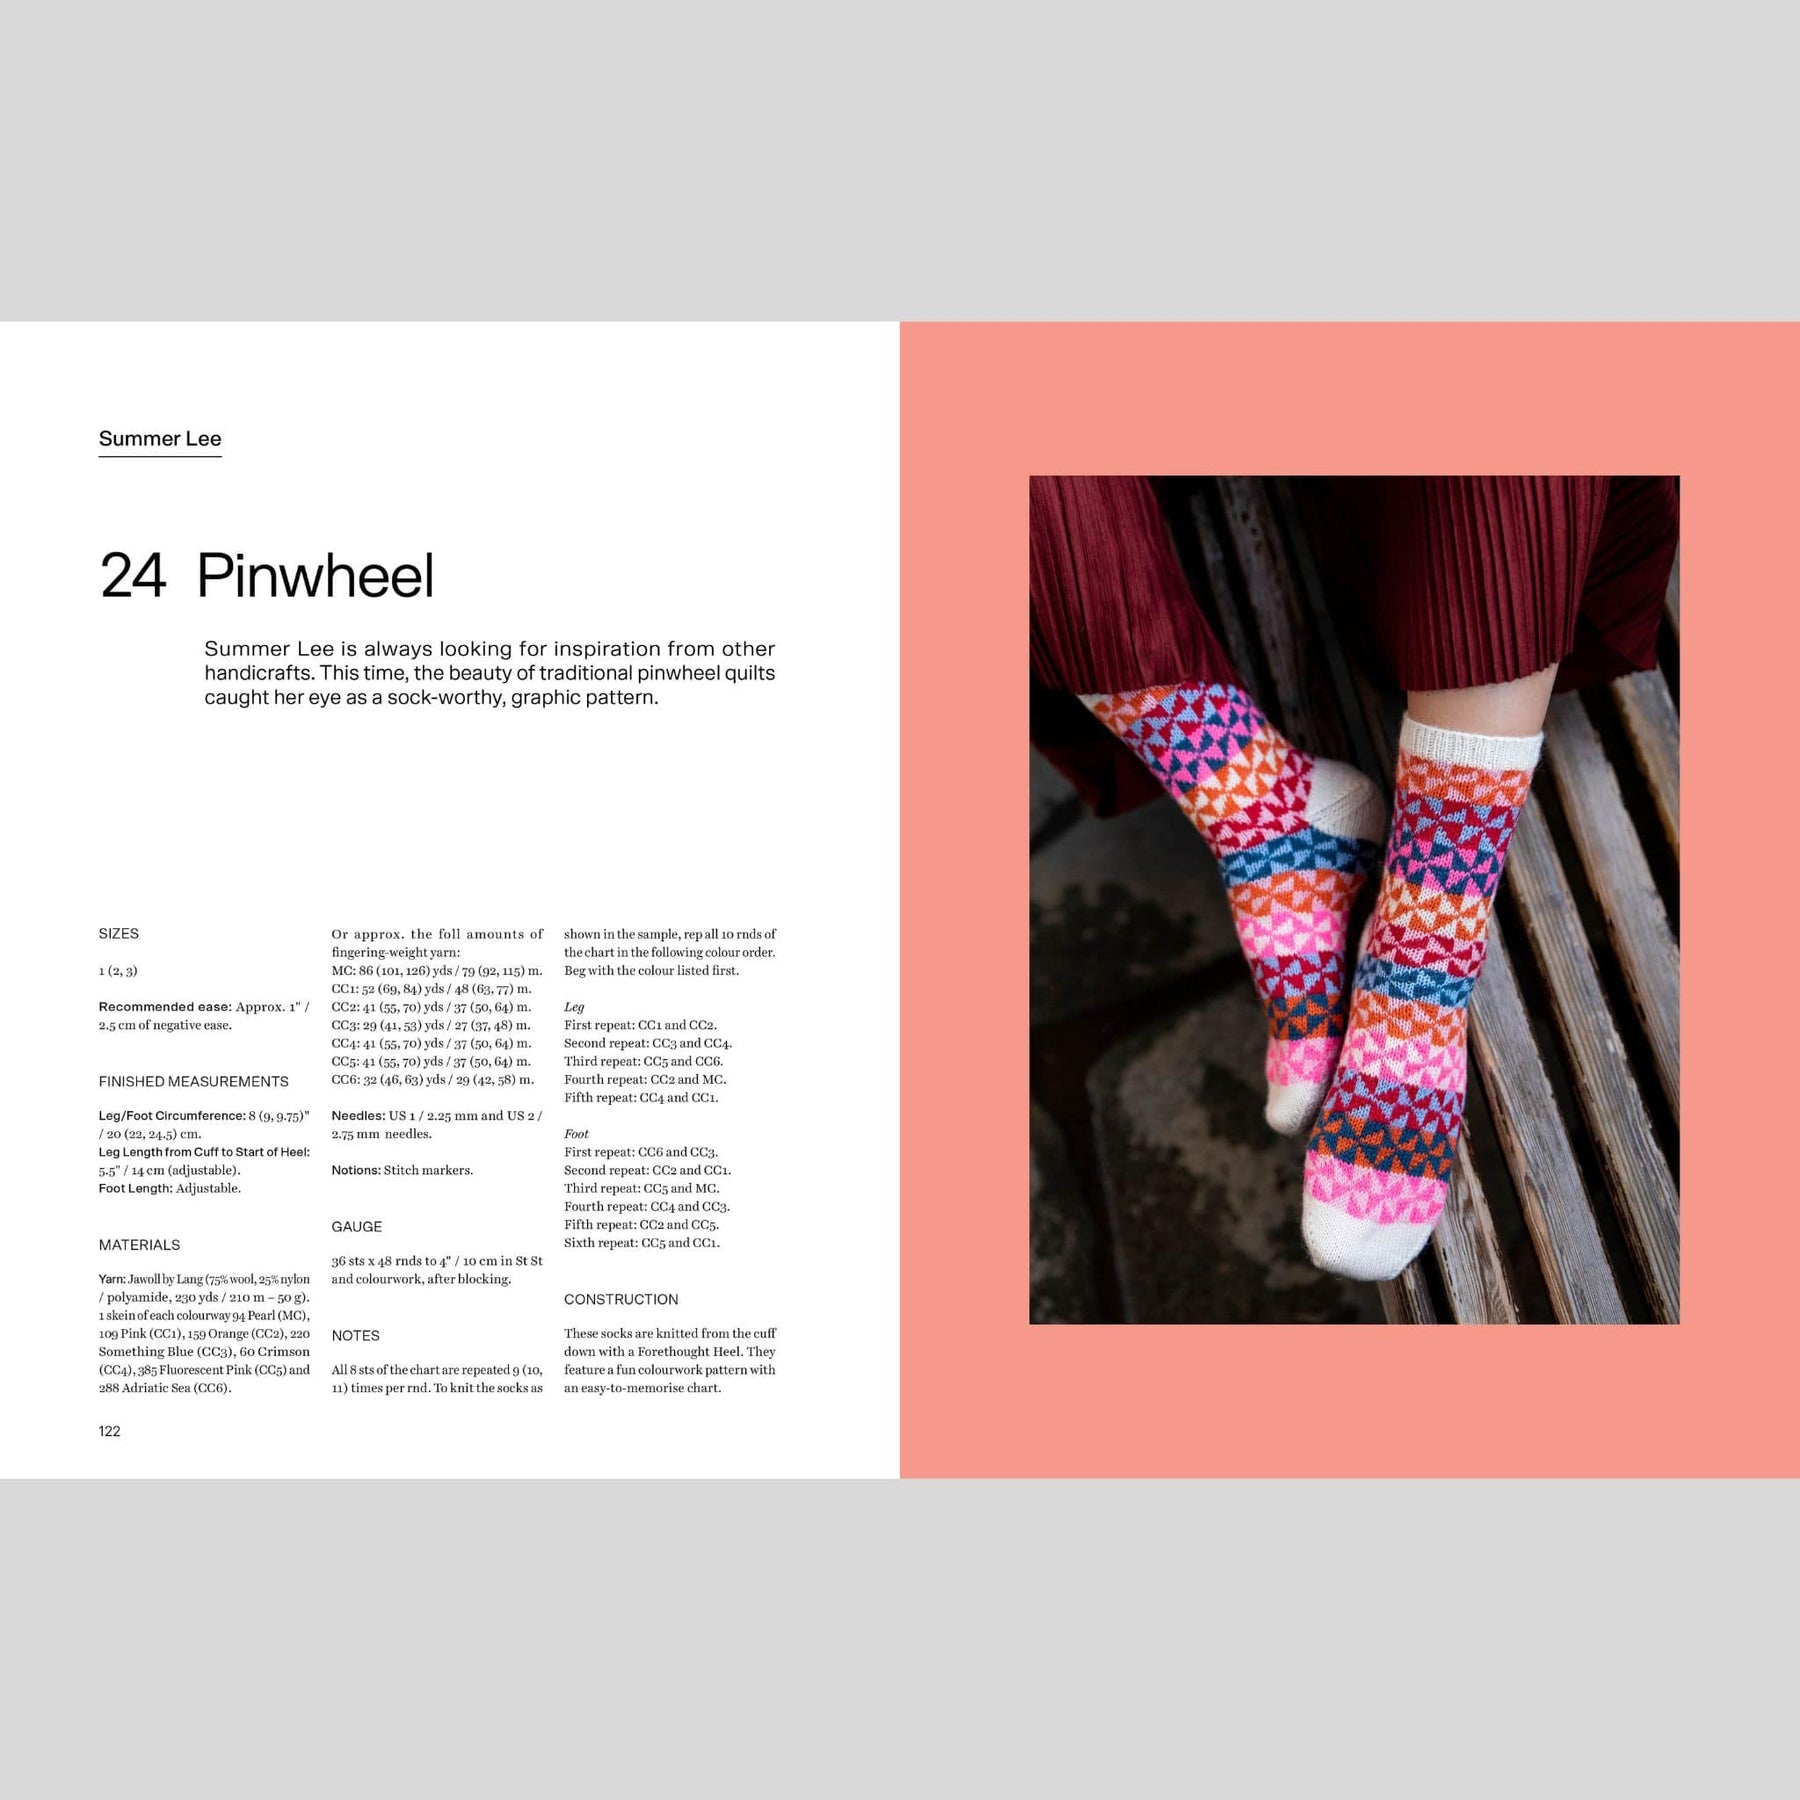 52 Weeks of Socks VOL II by Laine – Knitters Without Borders LLC